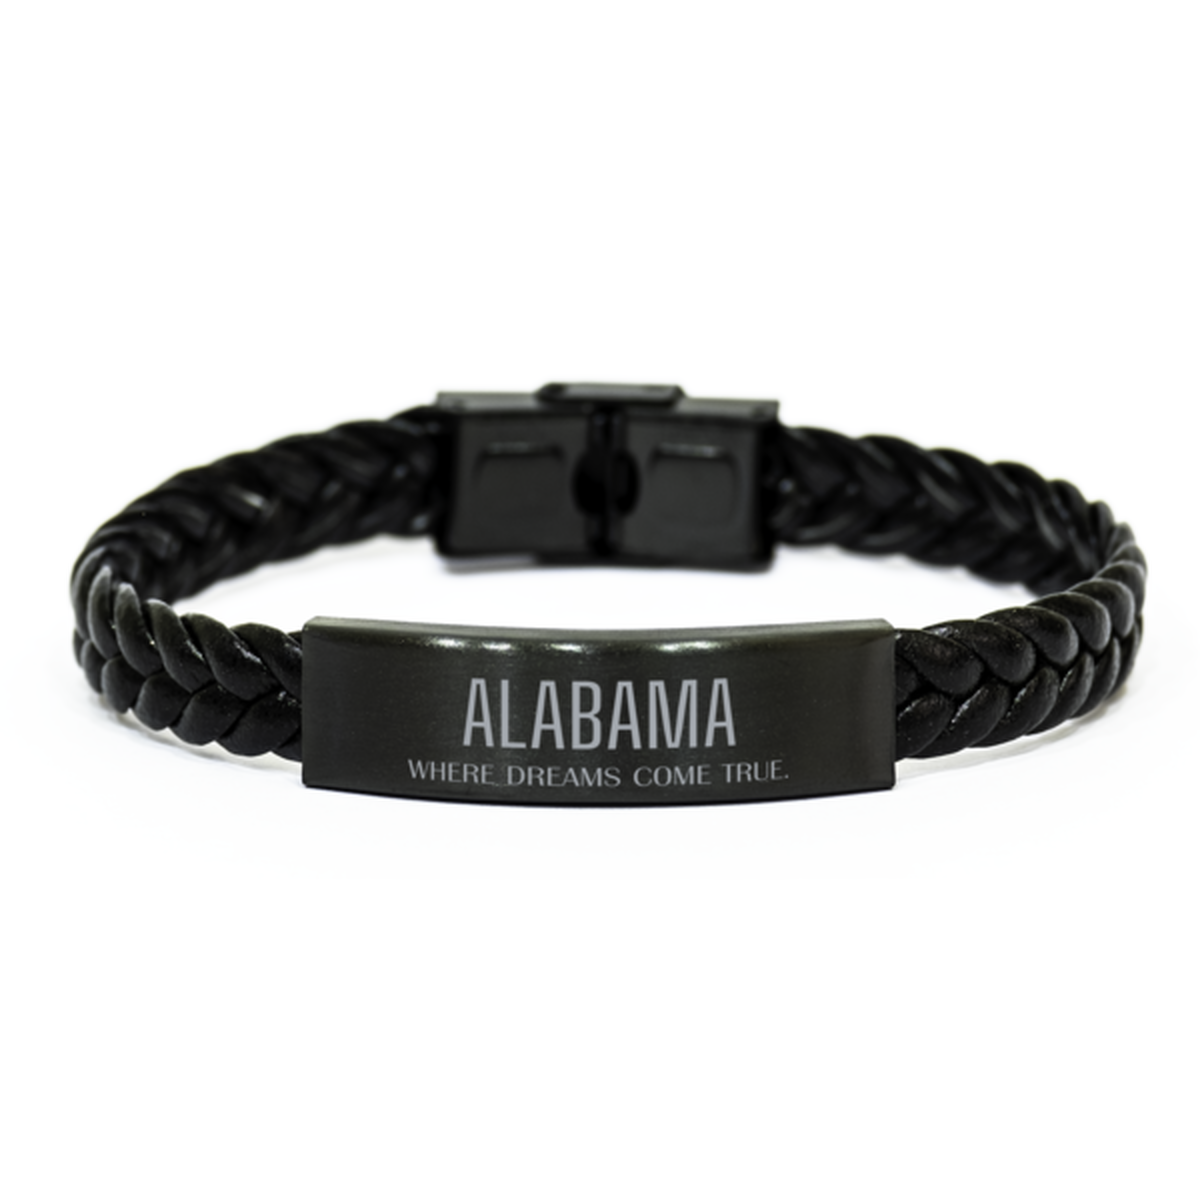 Love Alabama State Braided Leather Bracelet, Alabama Where dreams come true, Birthday Inspirational Gifts For Alabama Men, Women, Friends